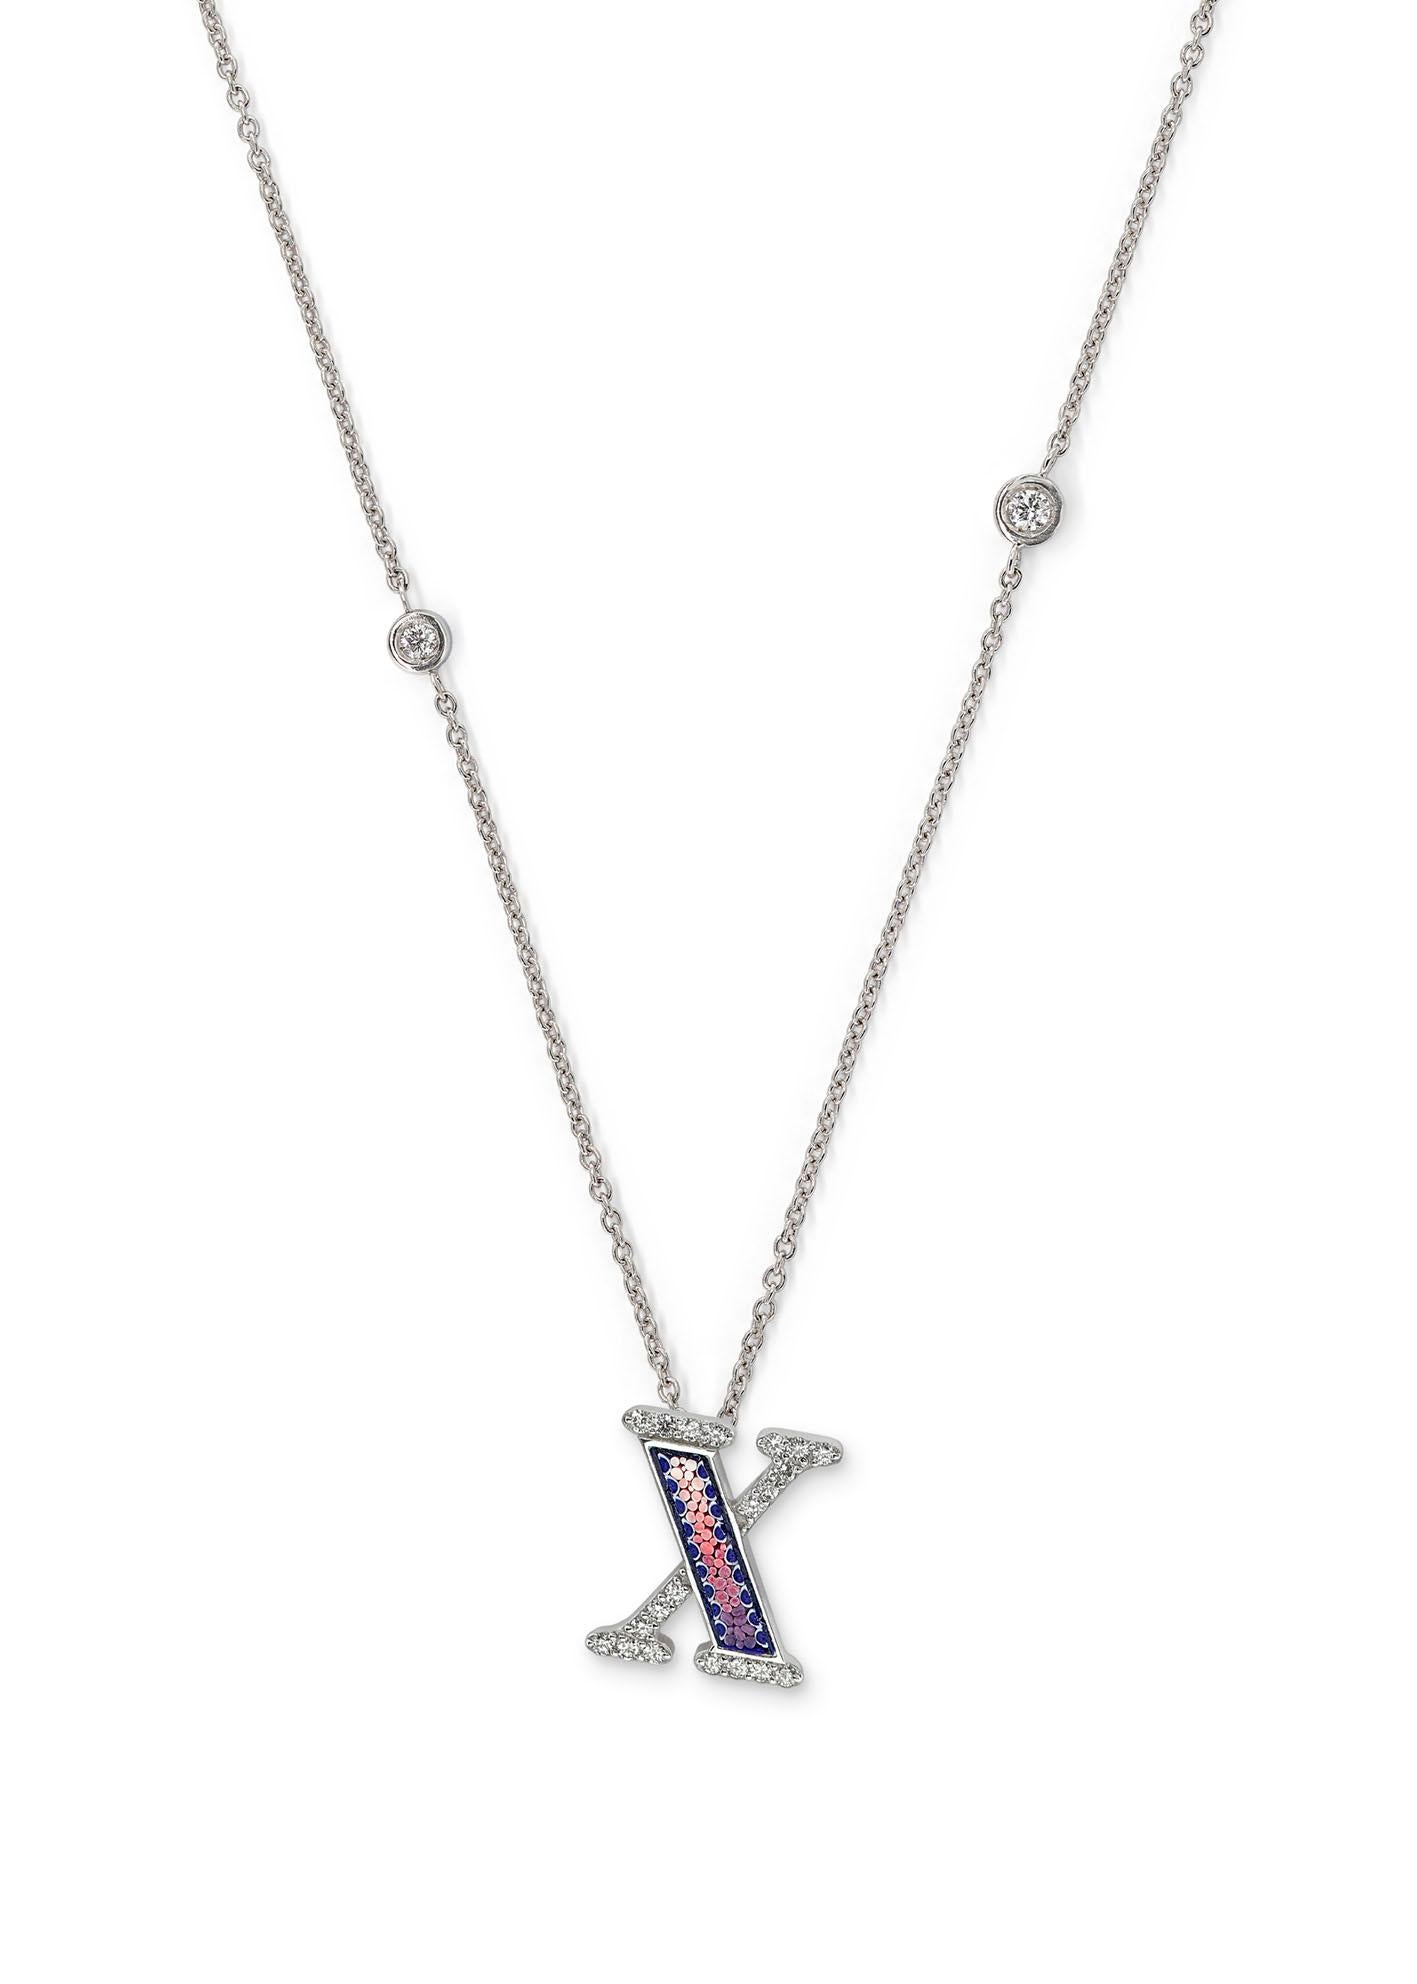 Brilliant Cut Necklace Letter X White Gold White Diamonds Hand Decorated with Micromosaic For Sale